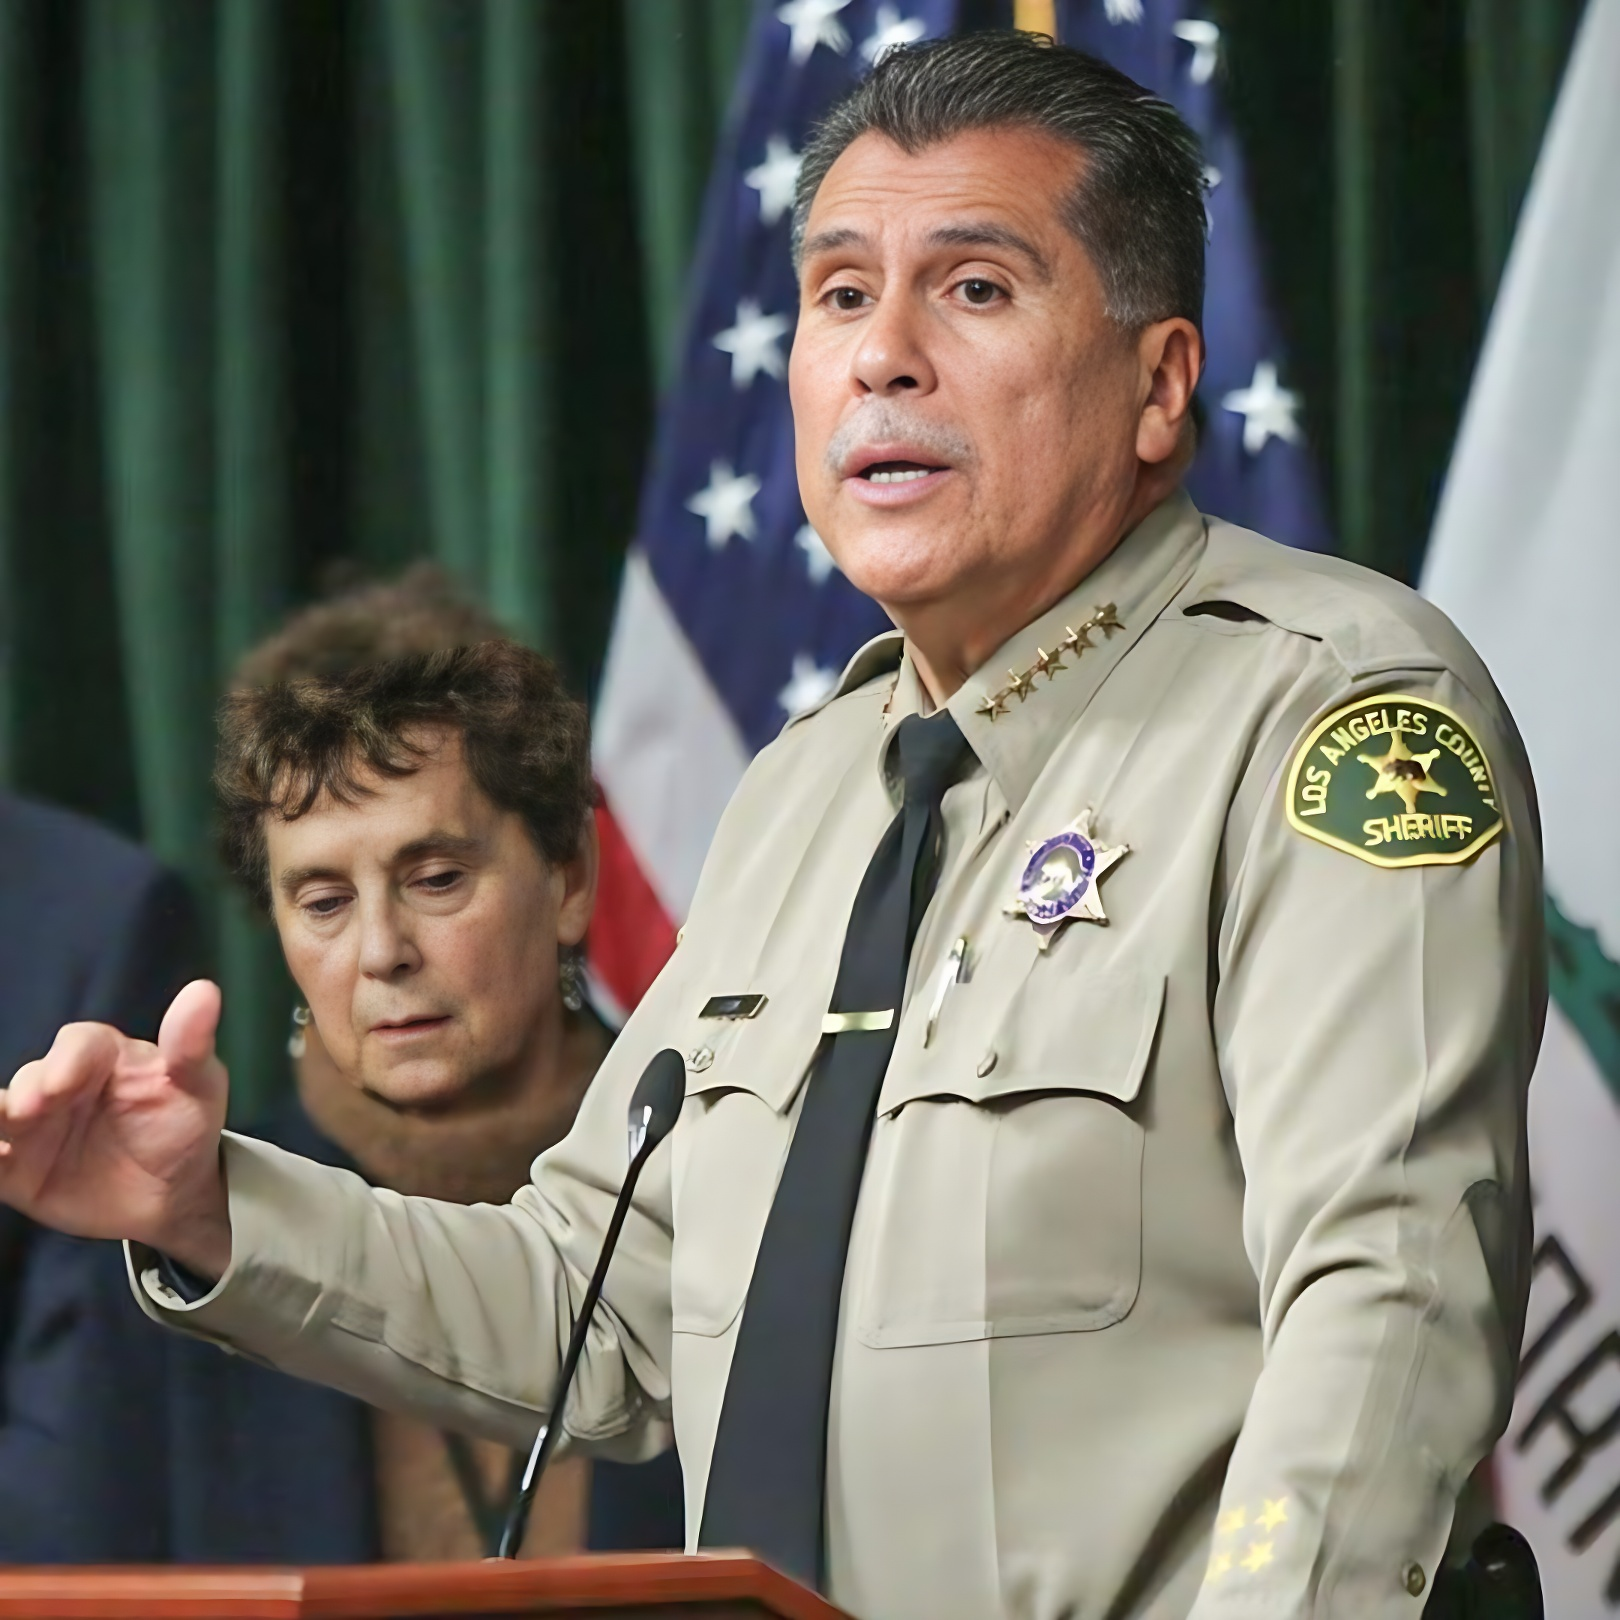 LA Co. Sheriff tells deputies to comply with gang investigation